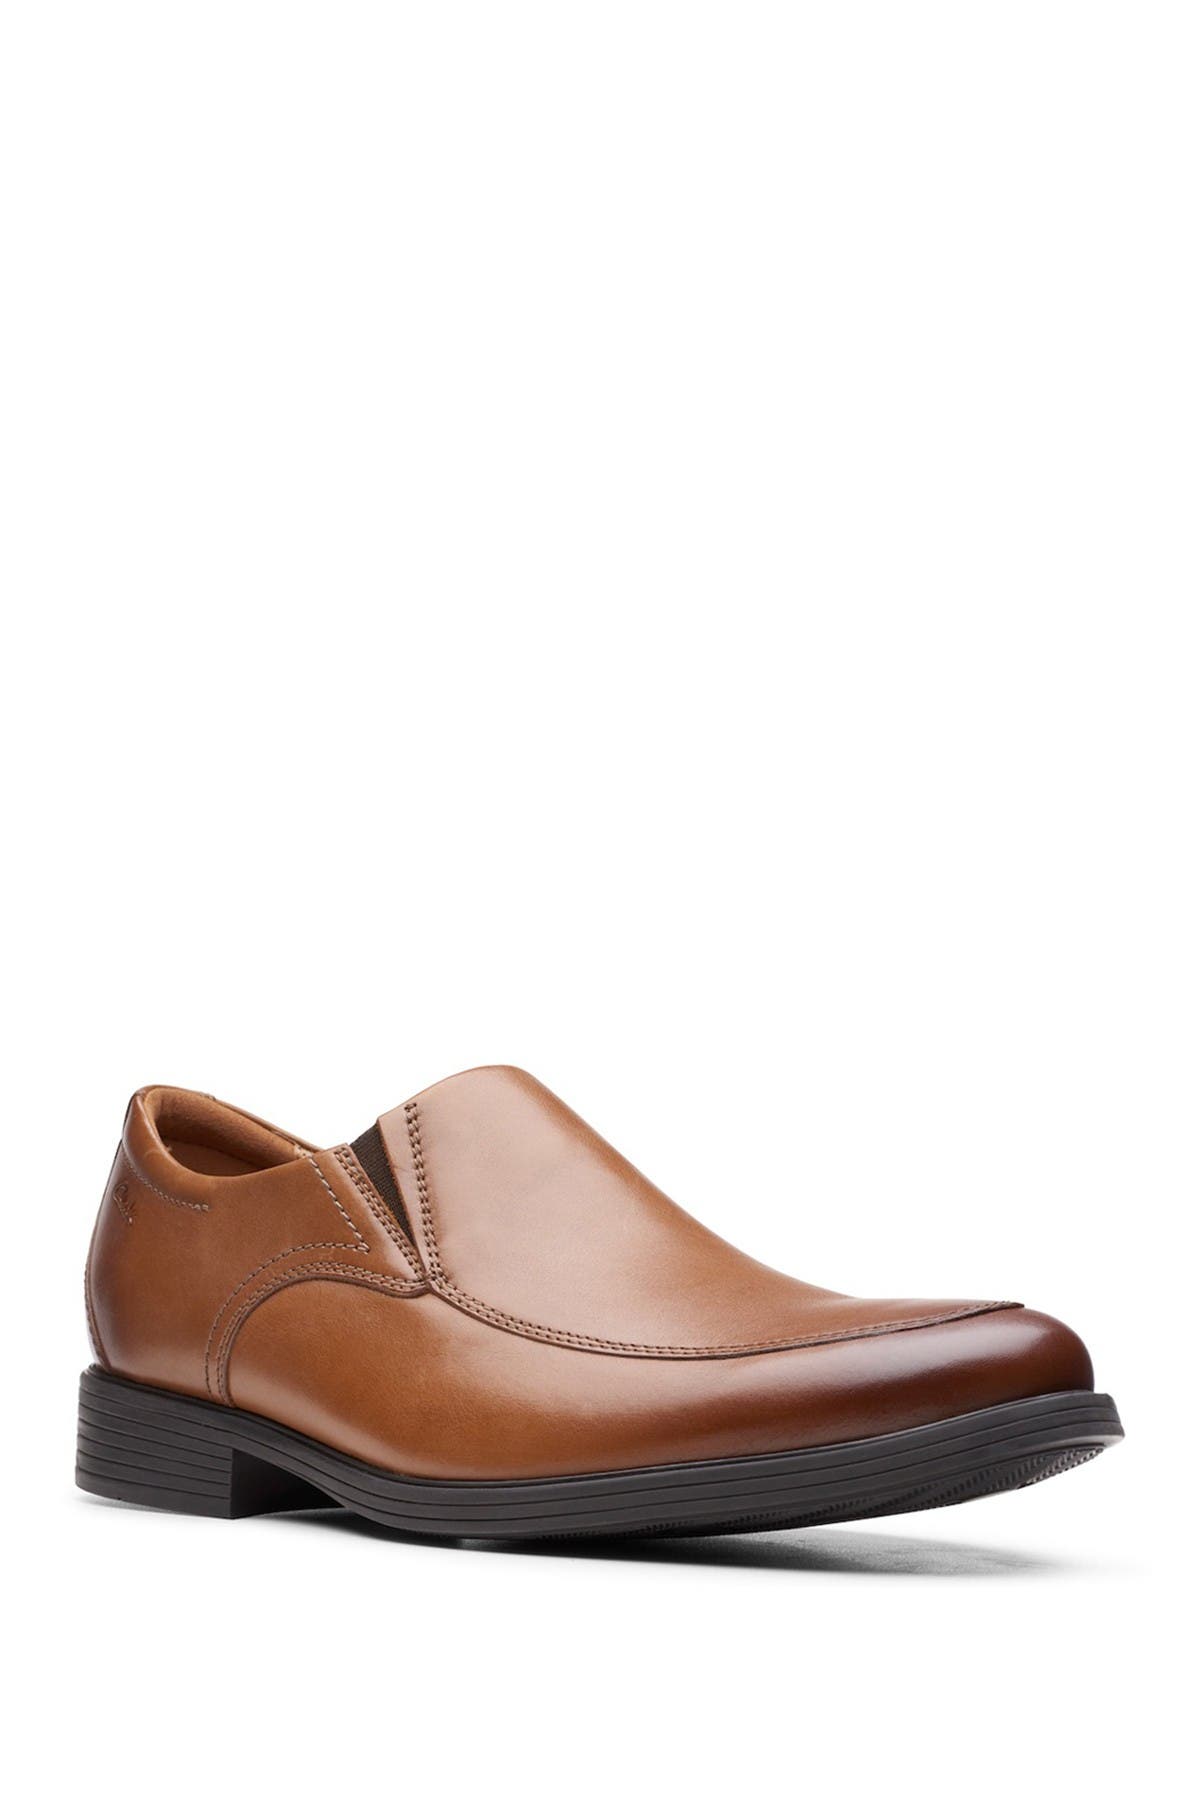 clarks loafers mens sale